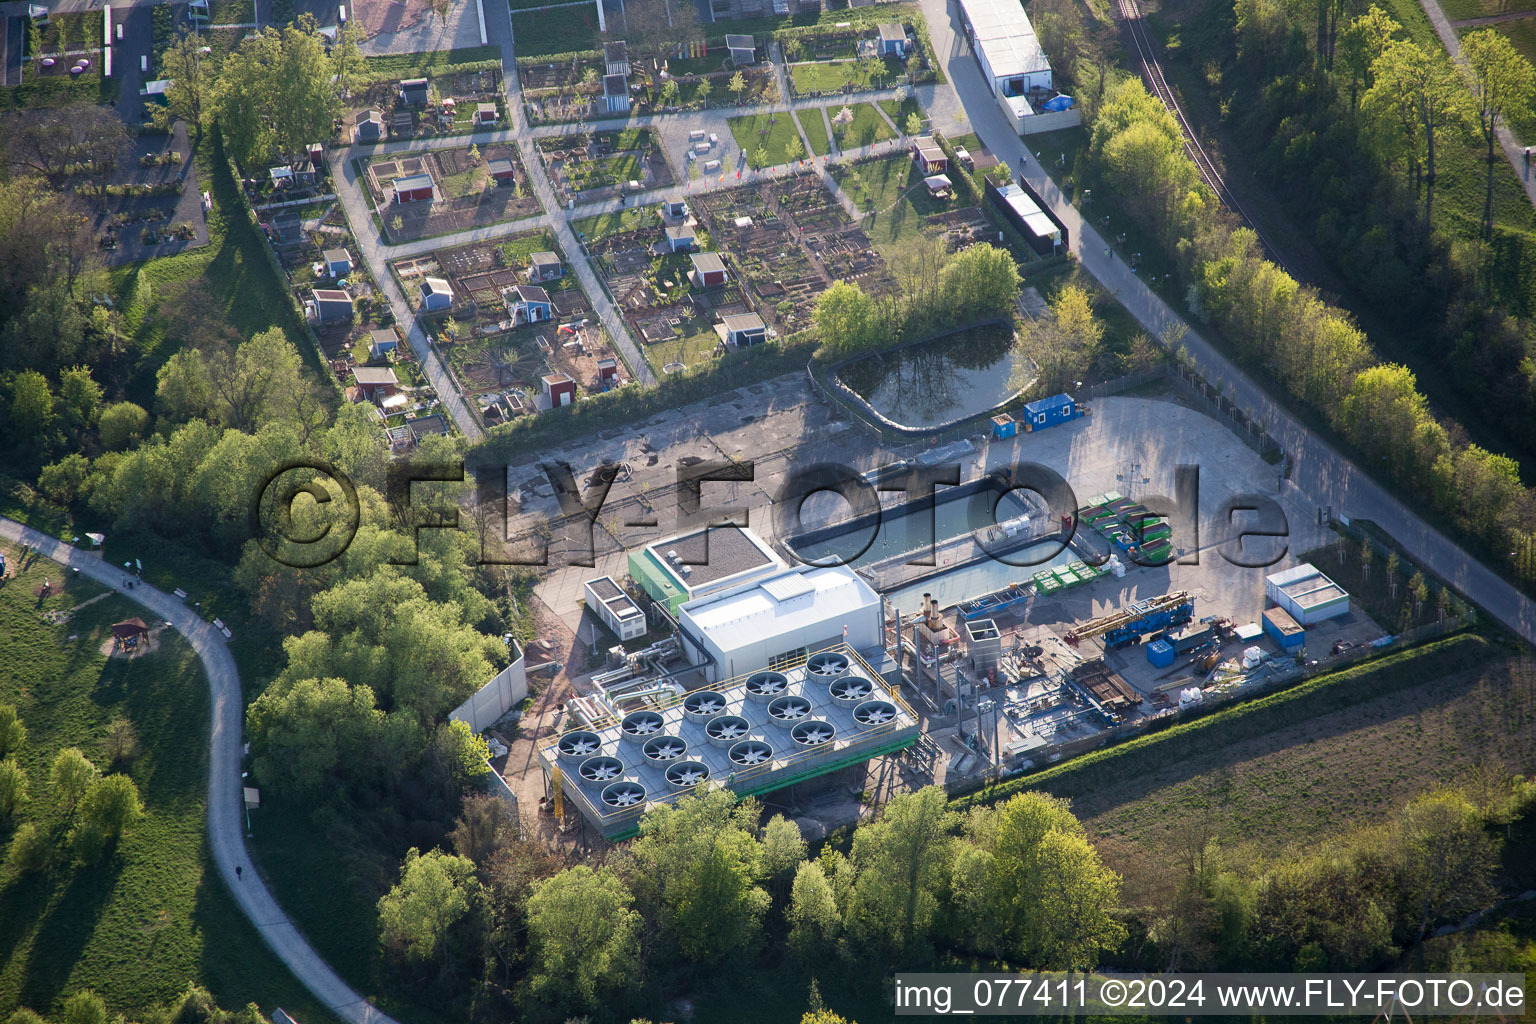 Oblique view of State Garden Show grounds in Landau in der Pfalz in the state Rhineland-Palatinate, Germany